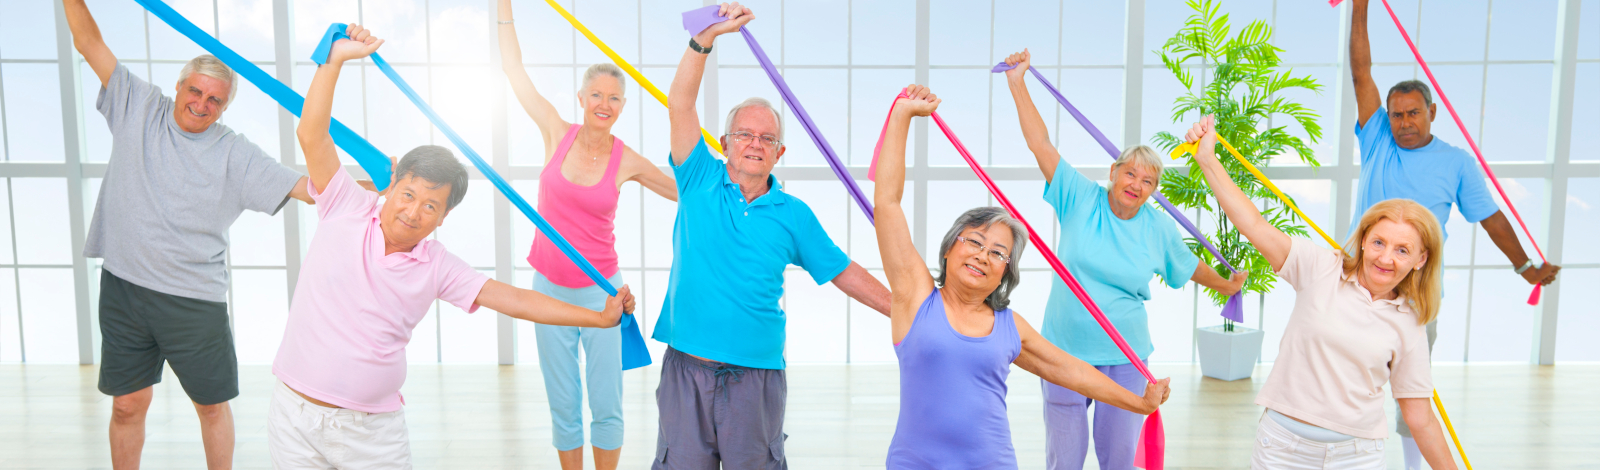 Group of older adults in fitness class